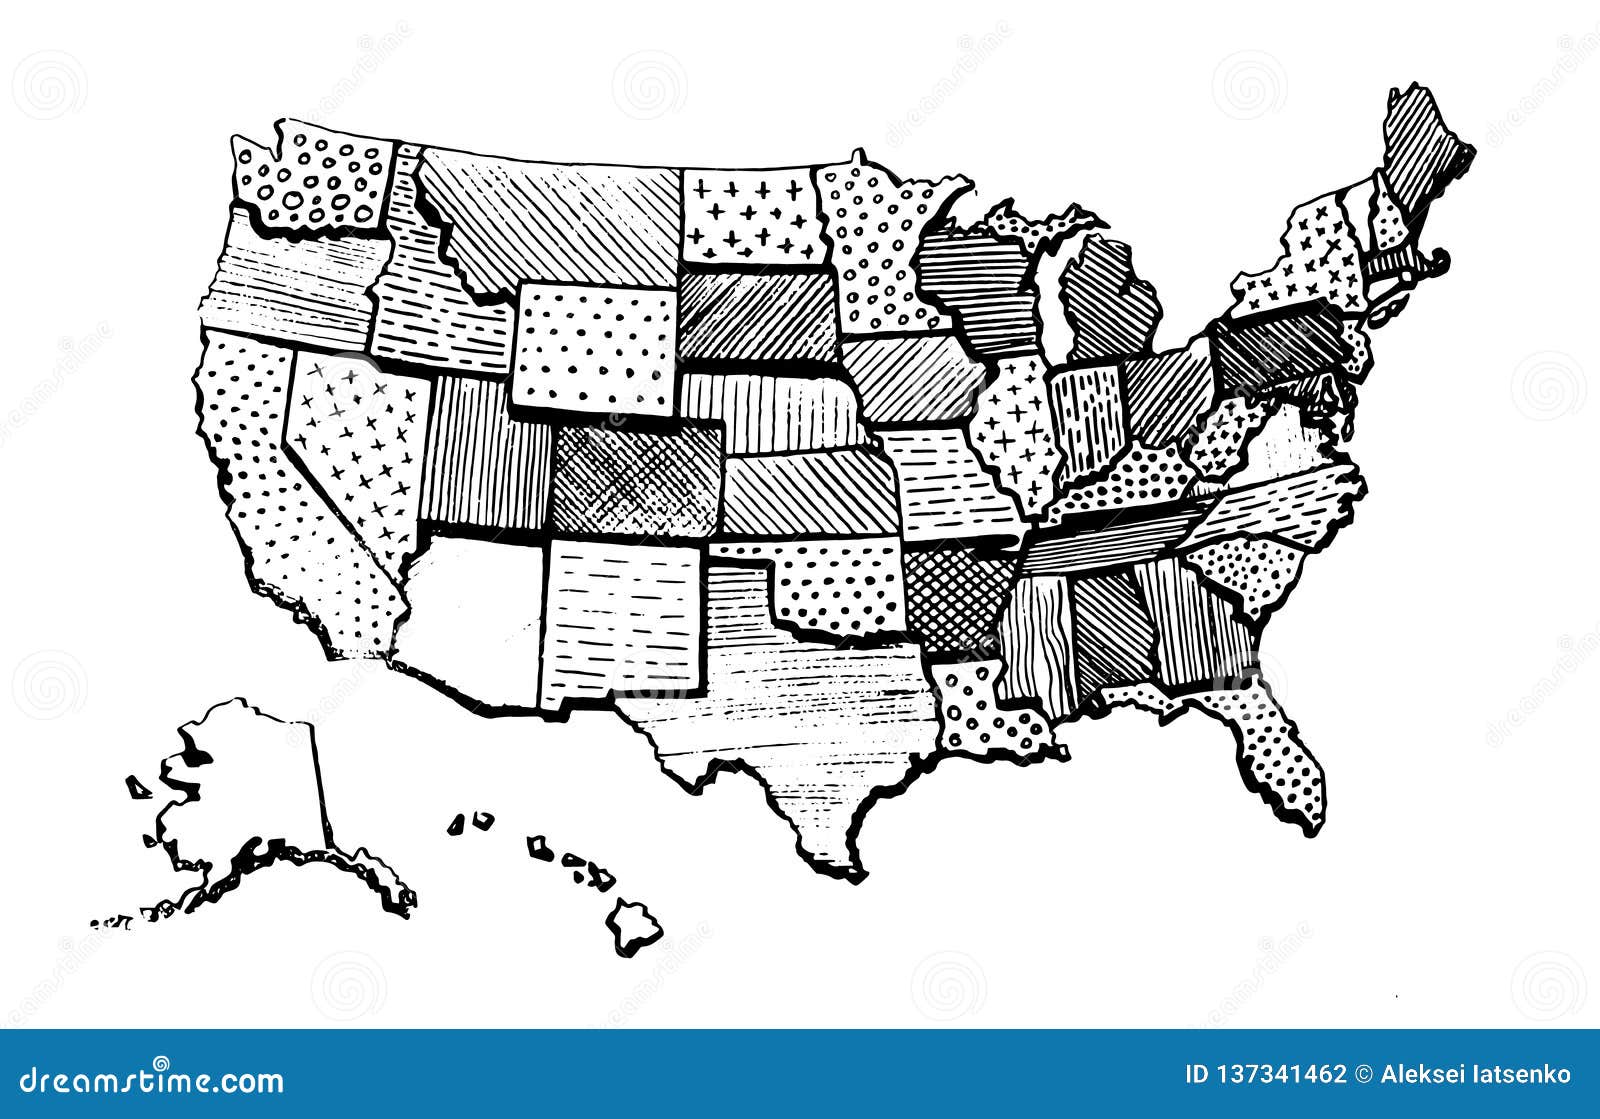 map of the us drawing Drawing Art Map Of United States Of America Funny Stock Vector map of the us drawing